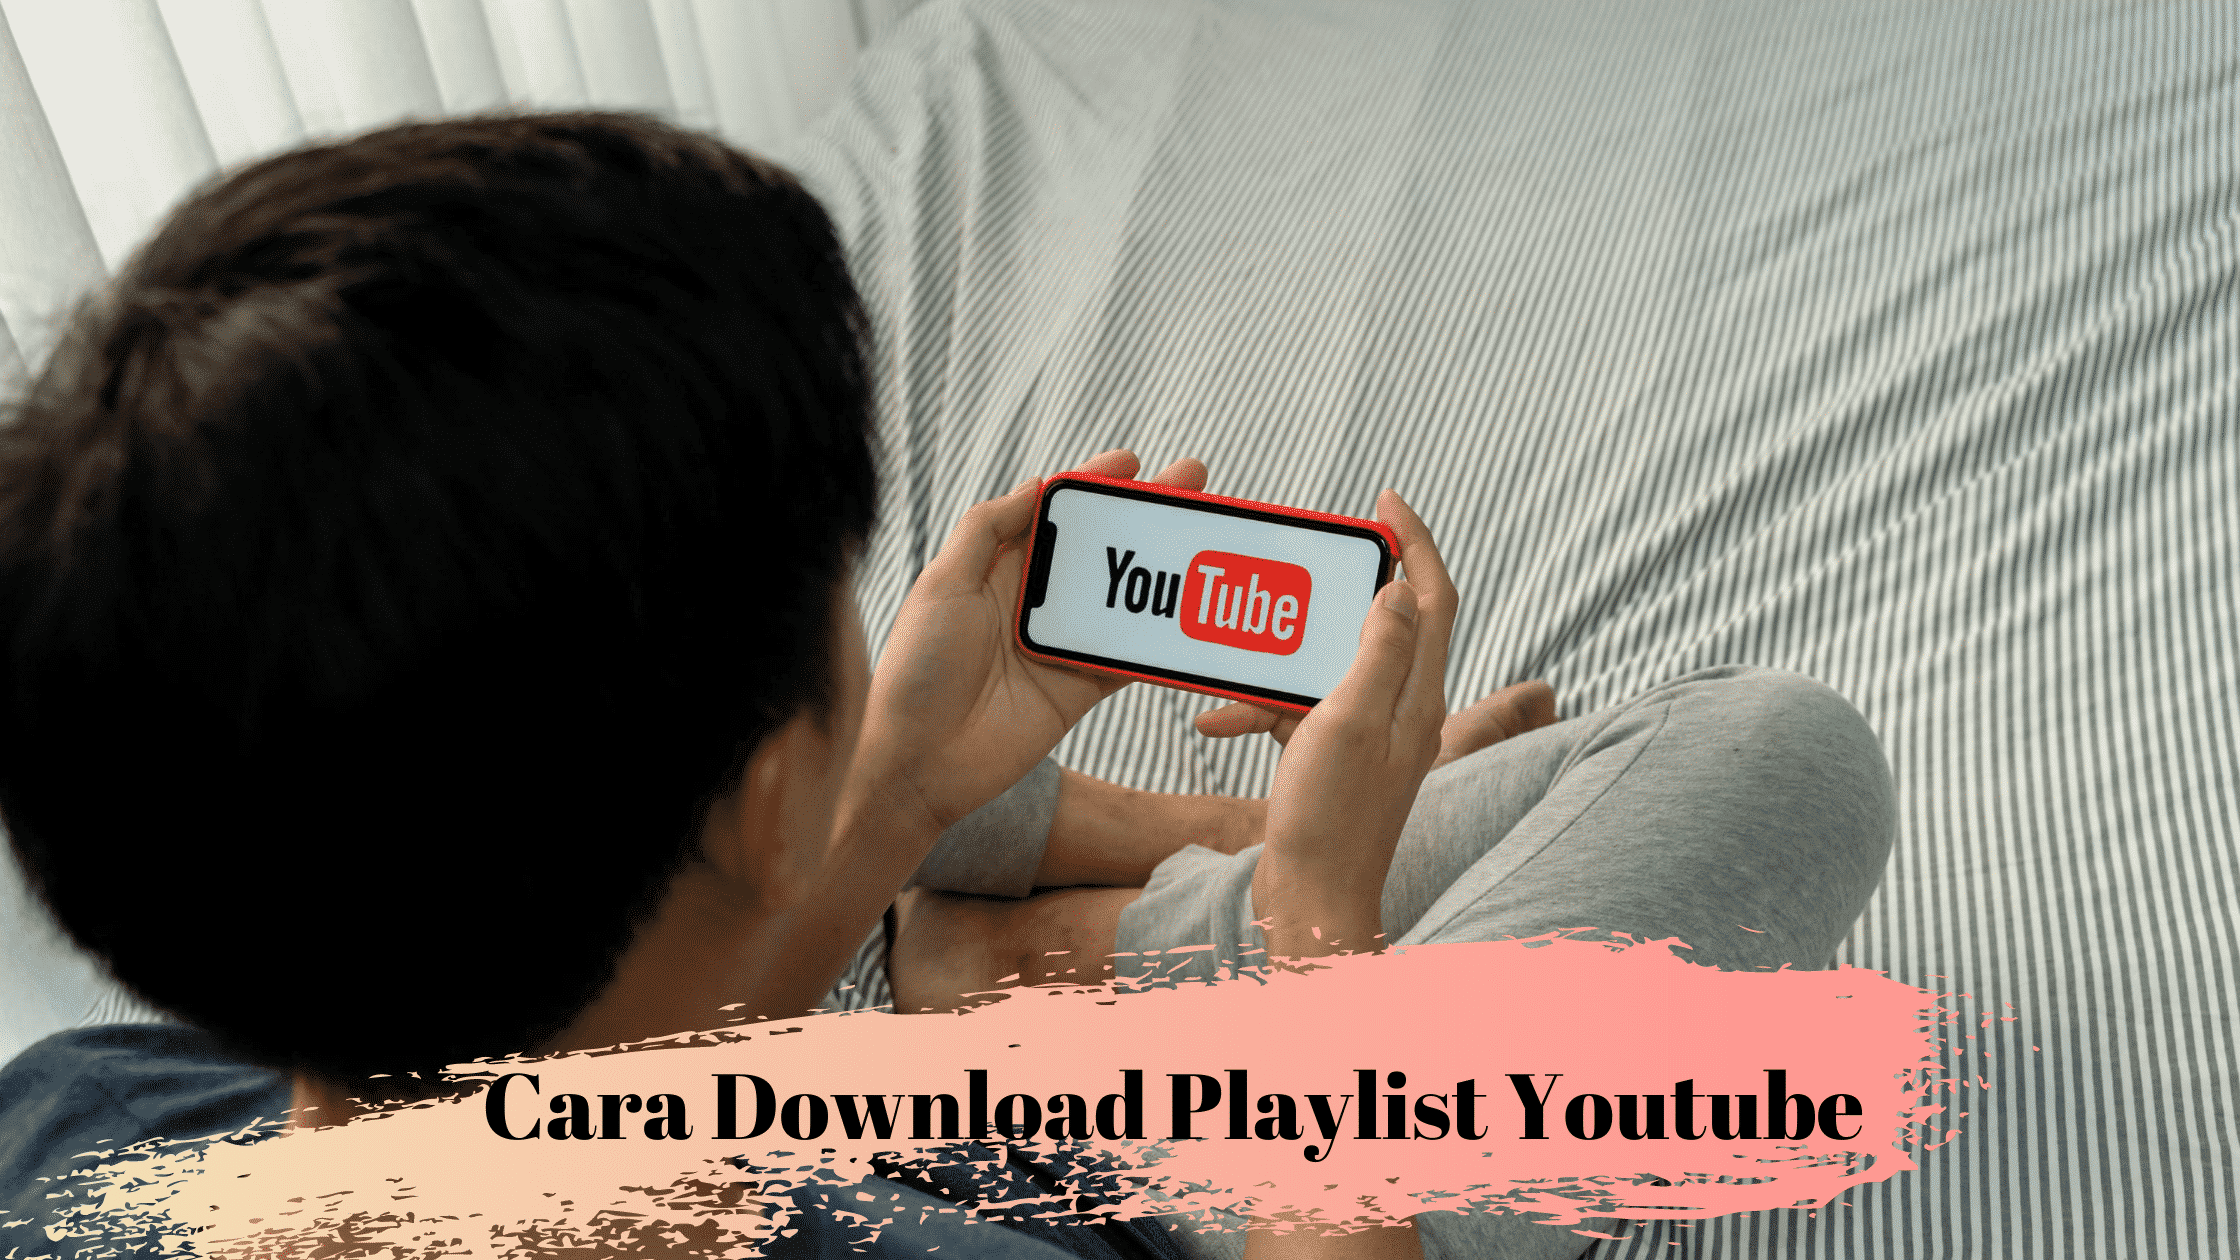 Cara Download Playlist Youtube Di Android. Cara Download Playlist Video Youtube